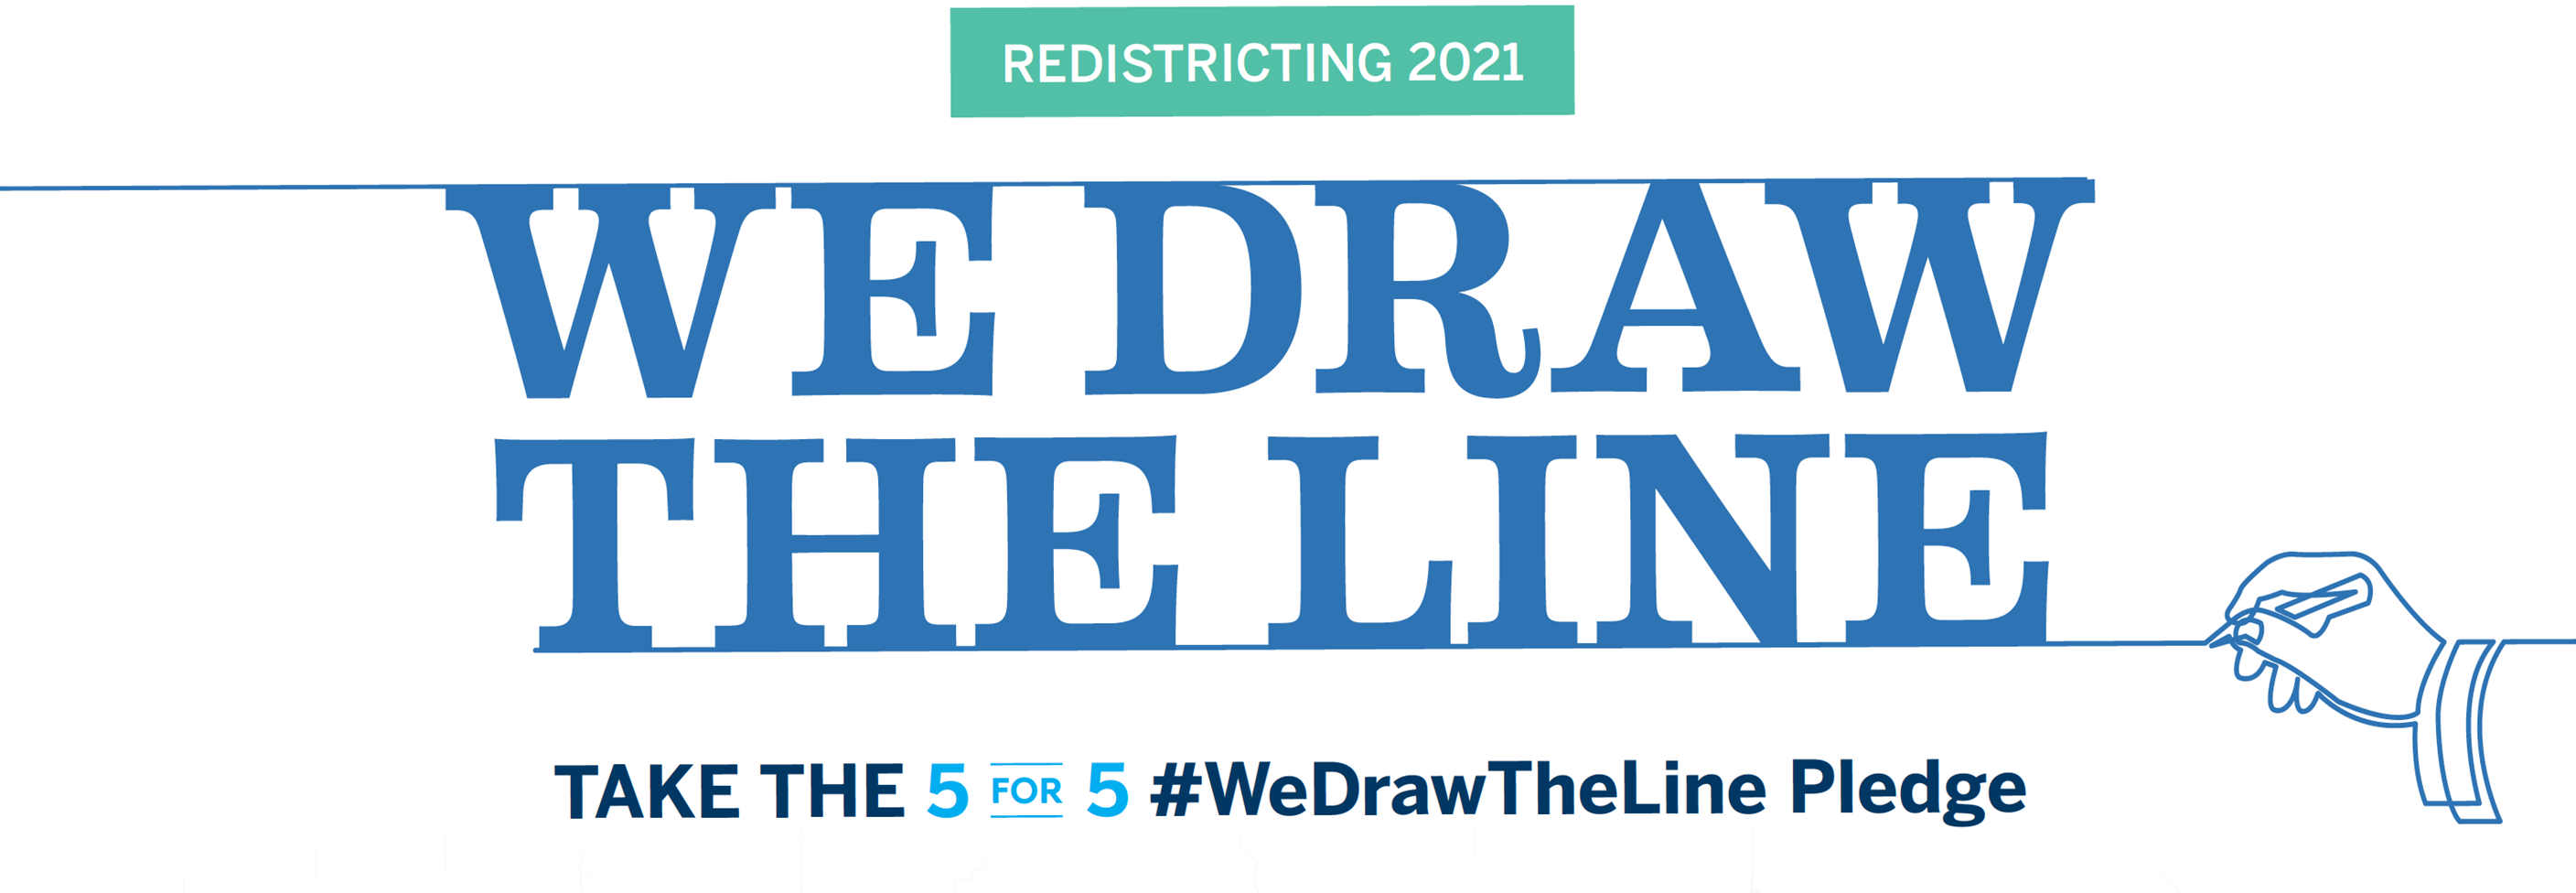 Redistricting 2021: We Draw The Line